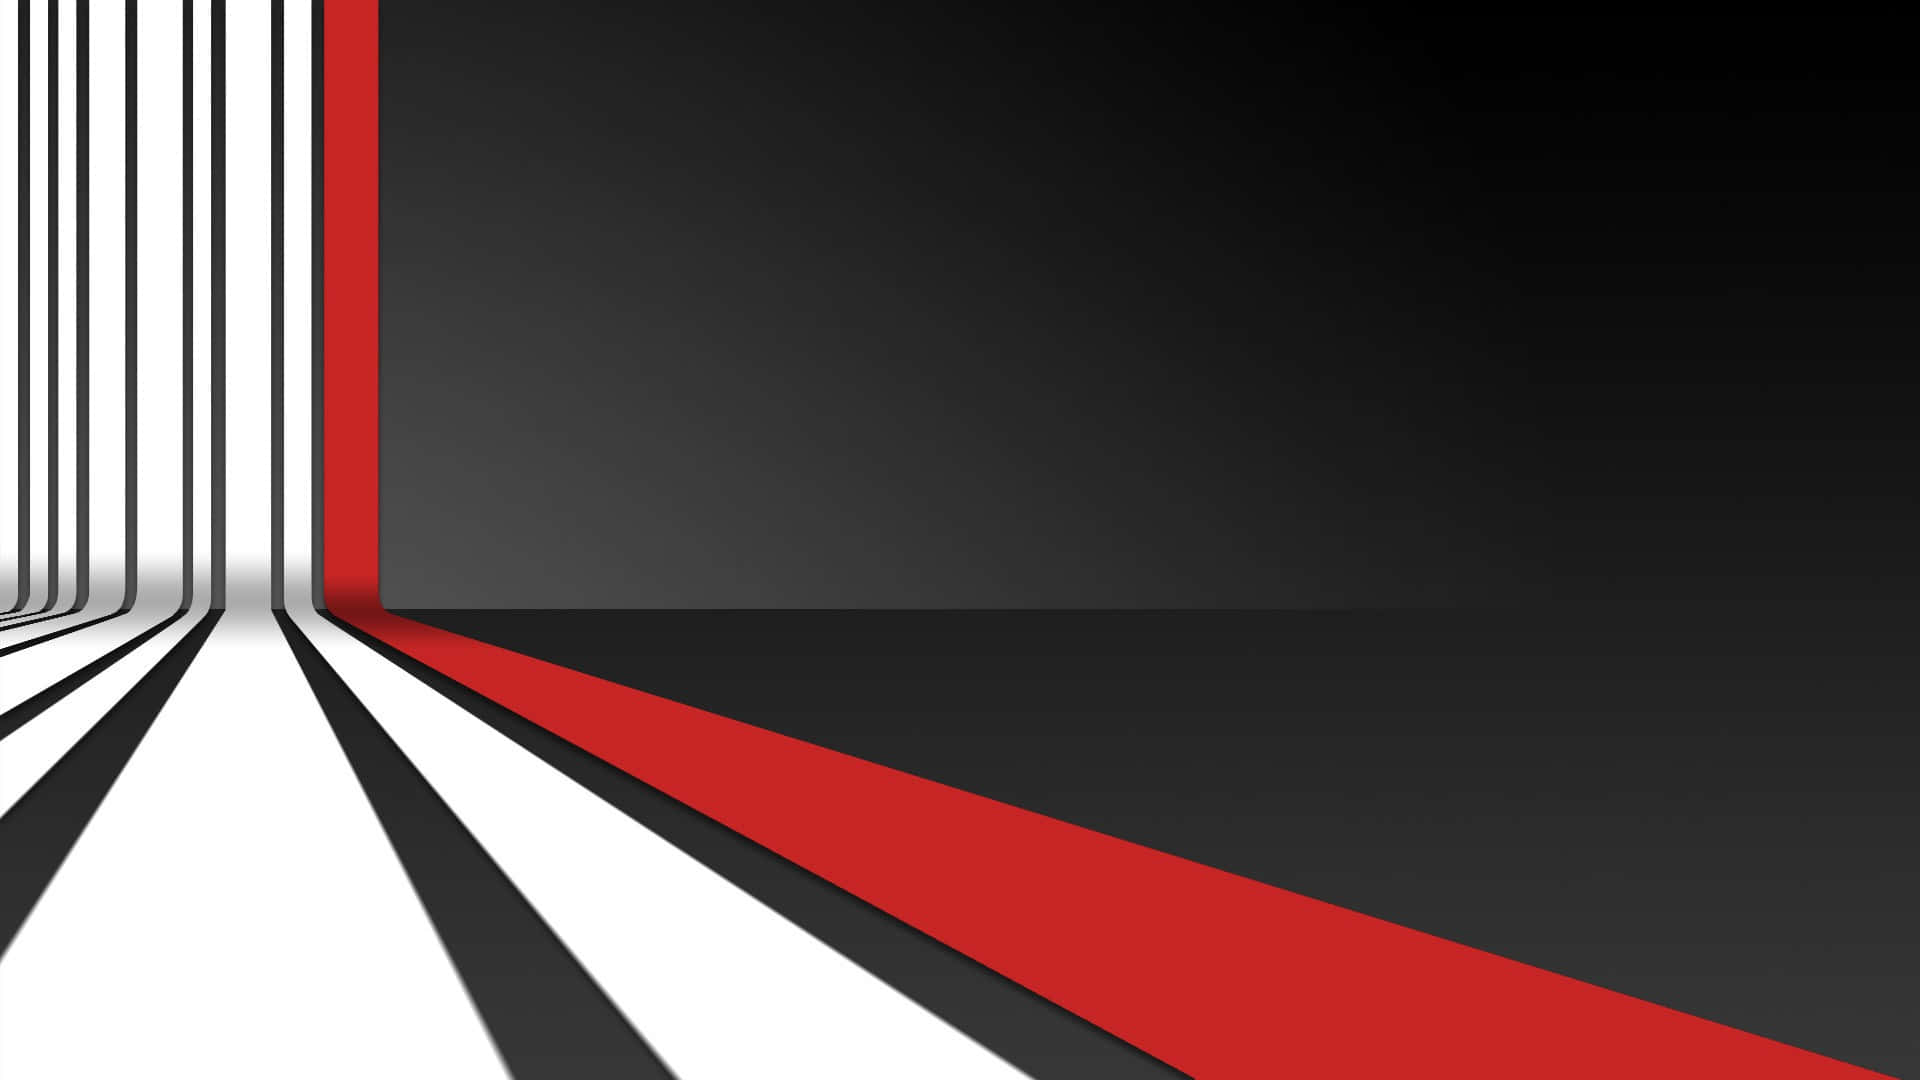 Follow the red line to discover something new Wallpaper